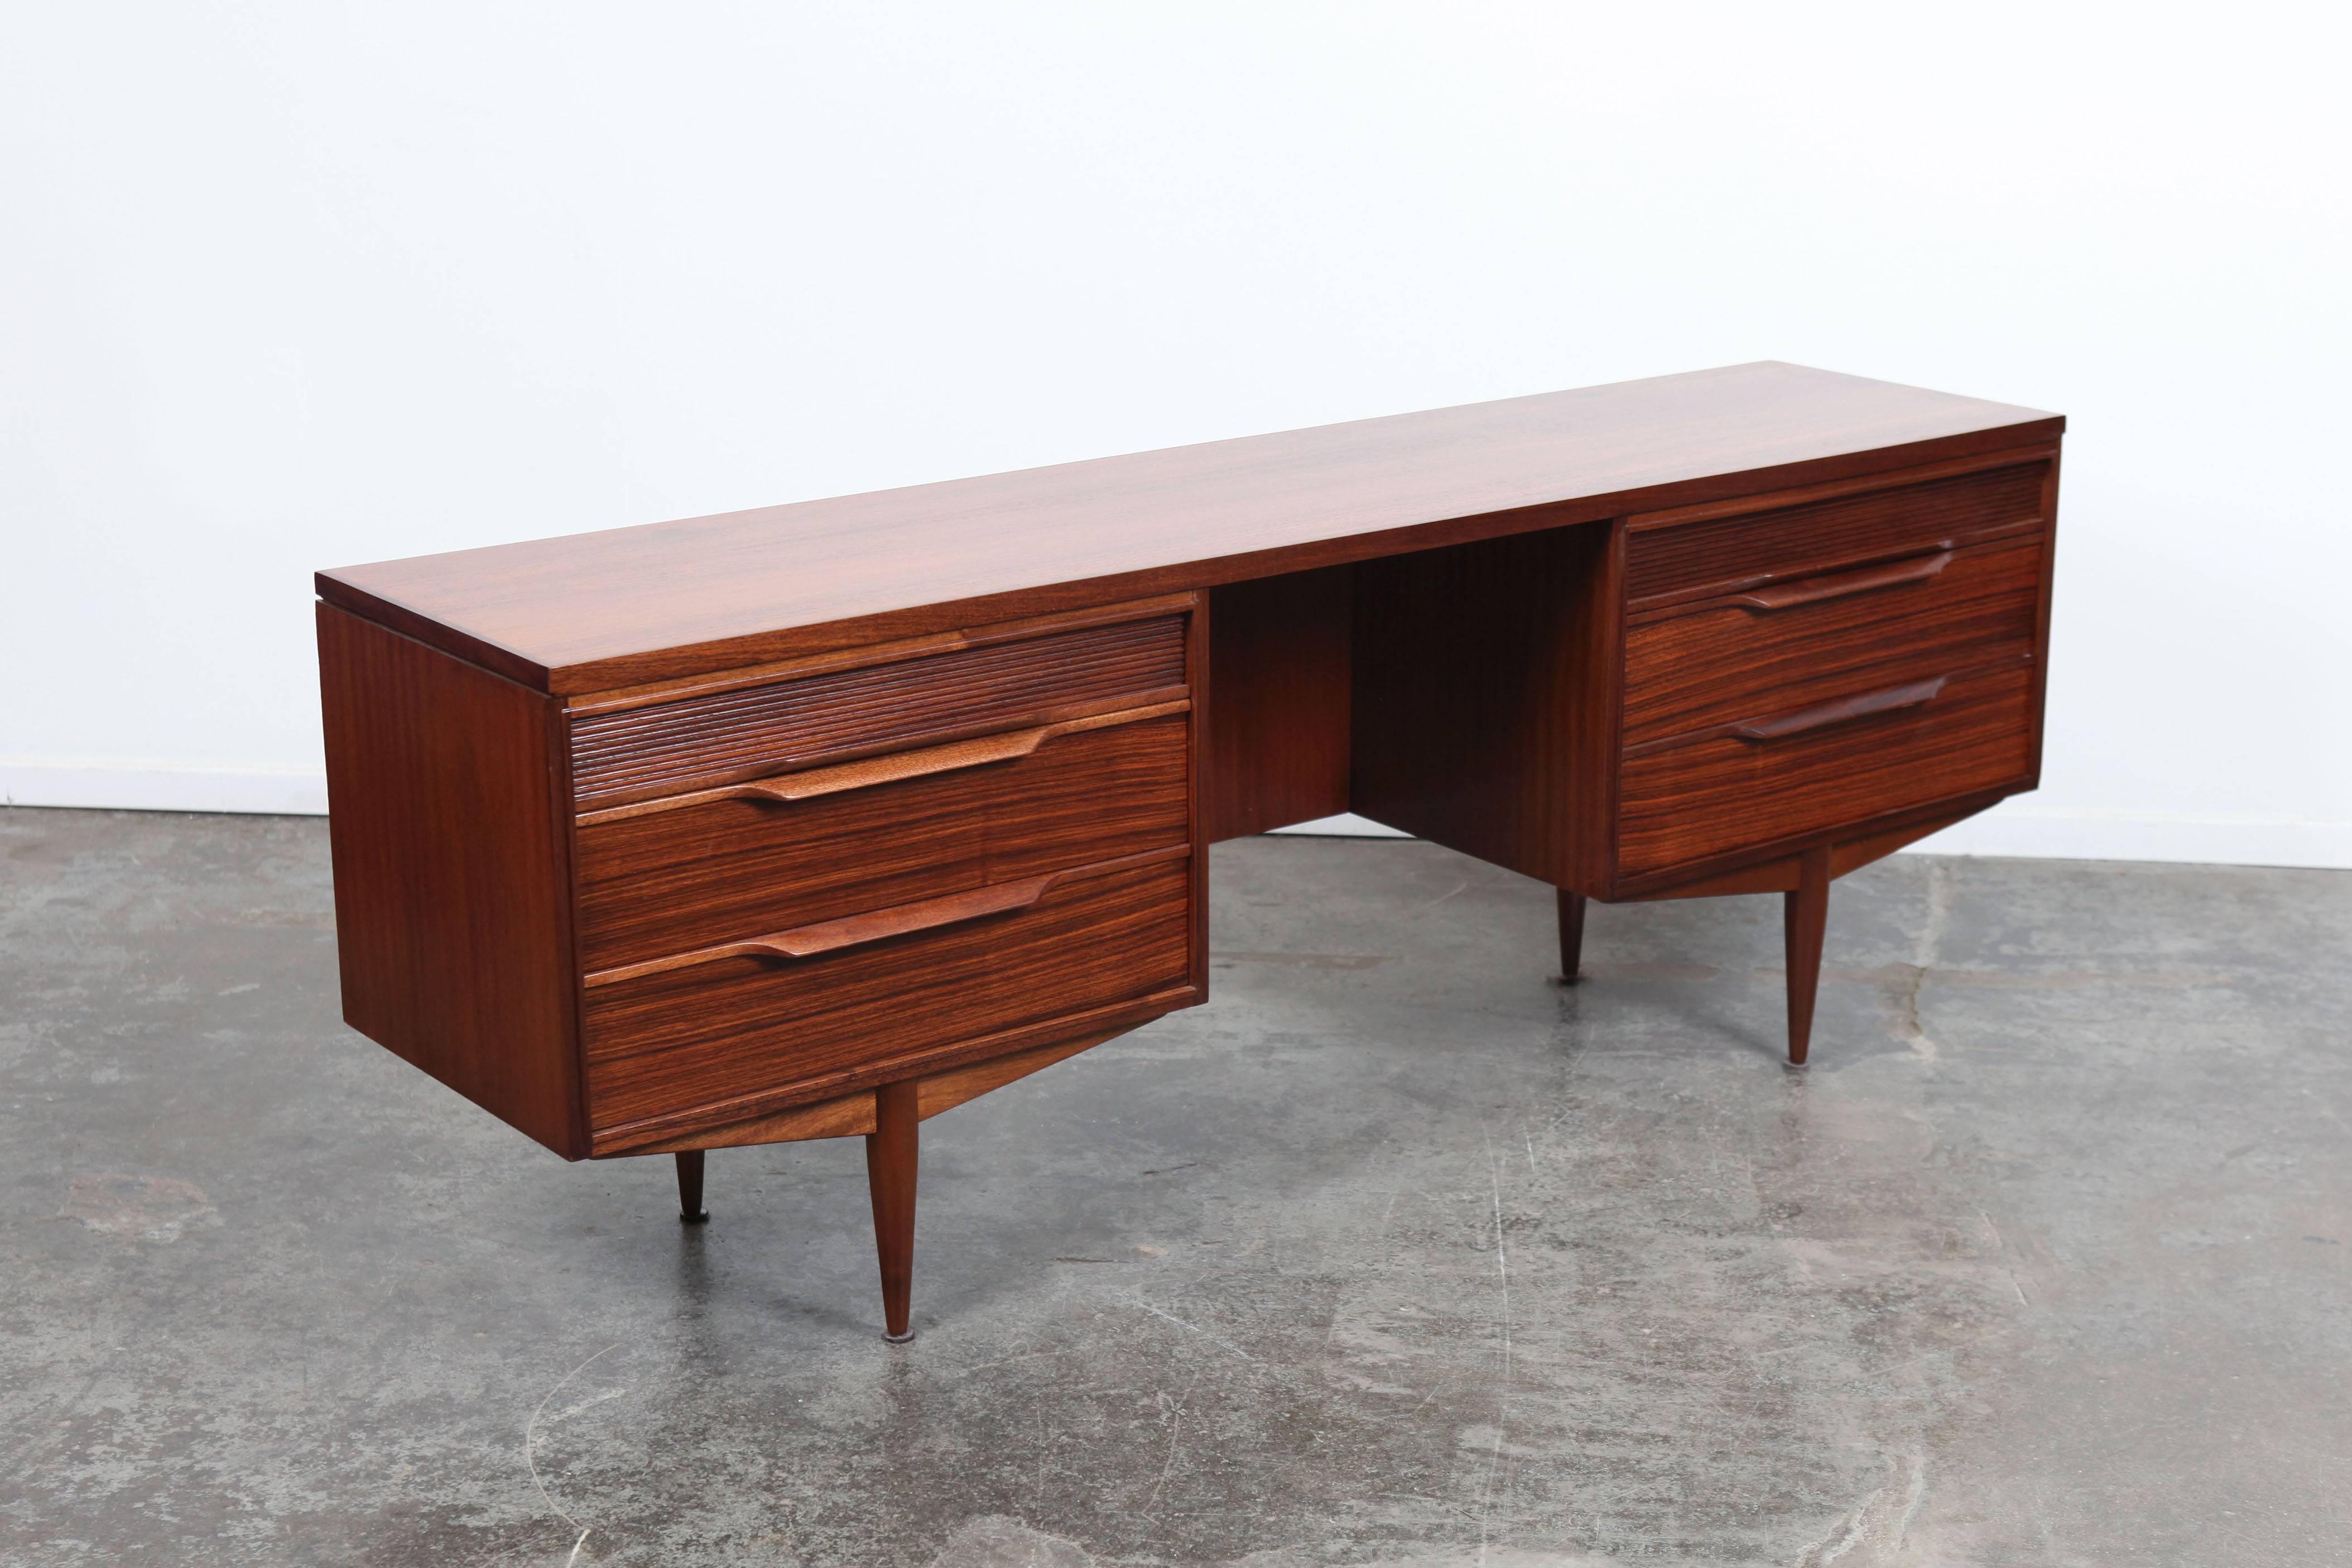 English Mid-Century Modern smaller desk-vanity made by quality manufacturer White & Newton. Newly lacquered and refinished, this piece has 6 drawers and four tapered legs.